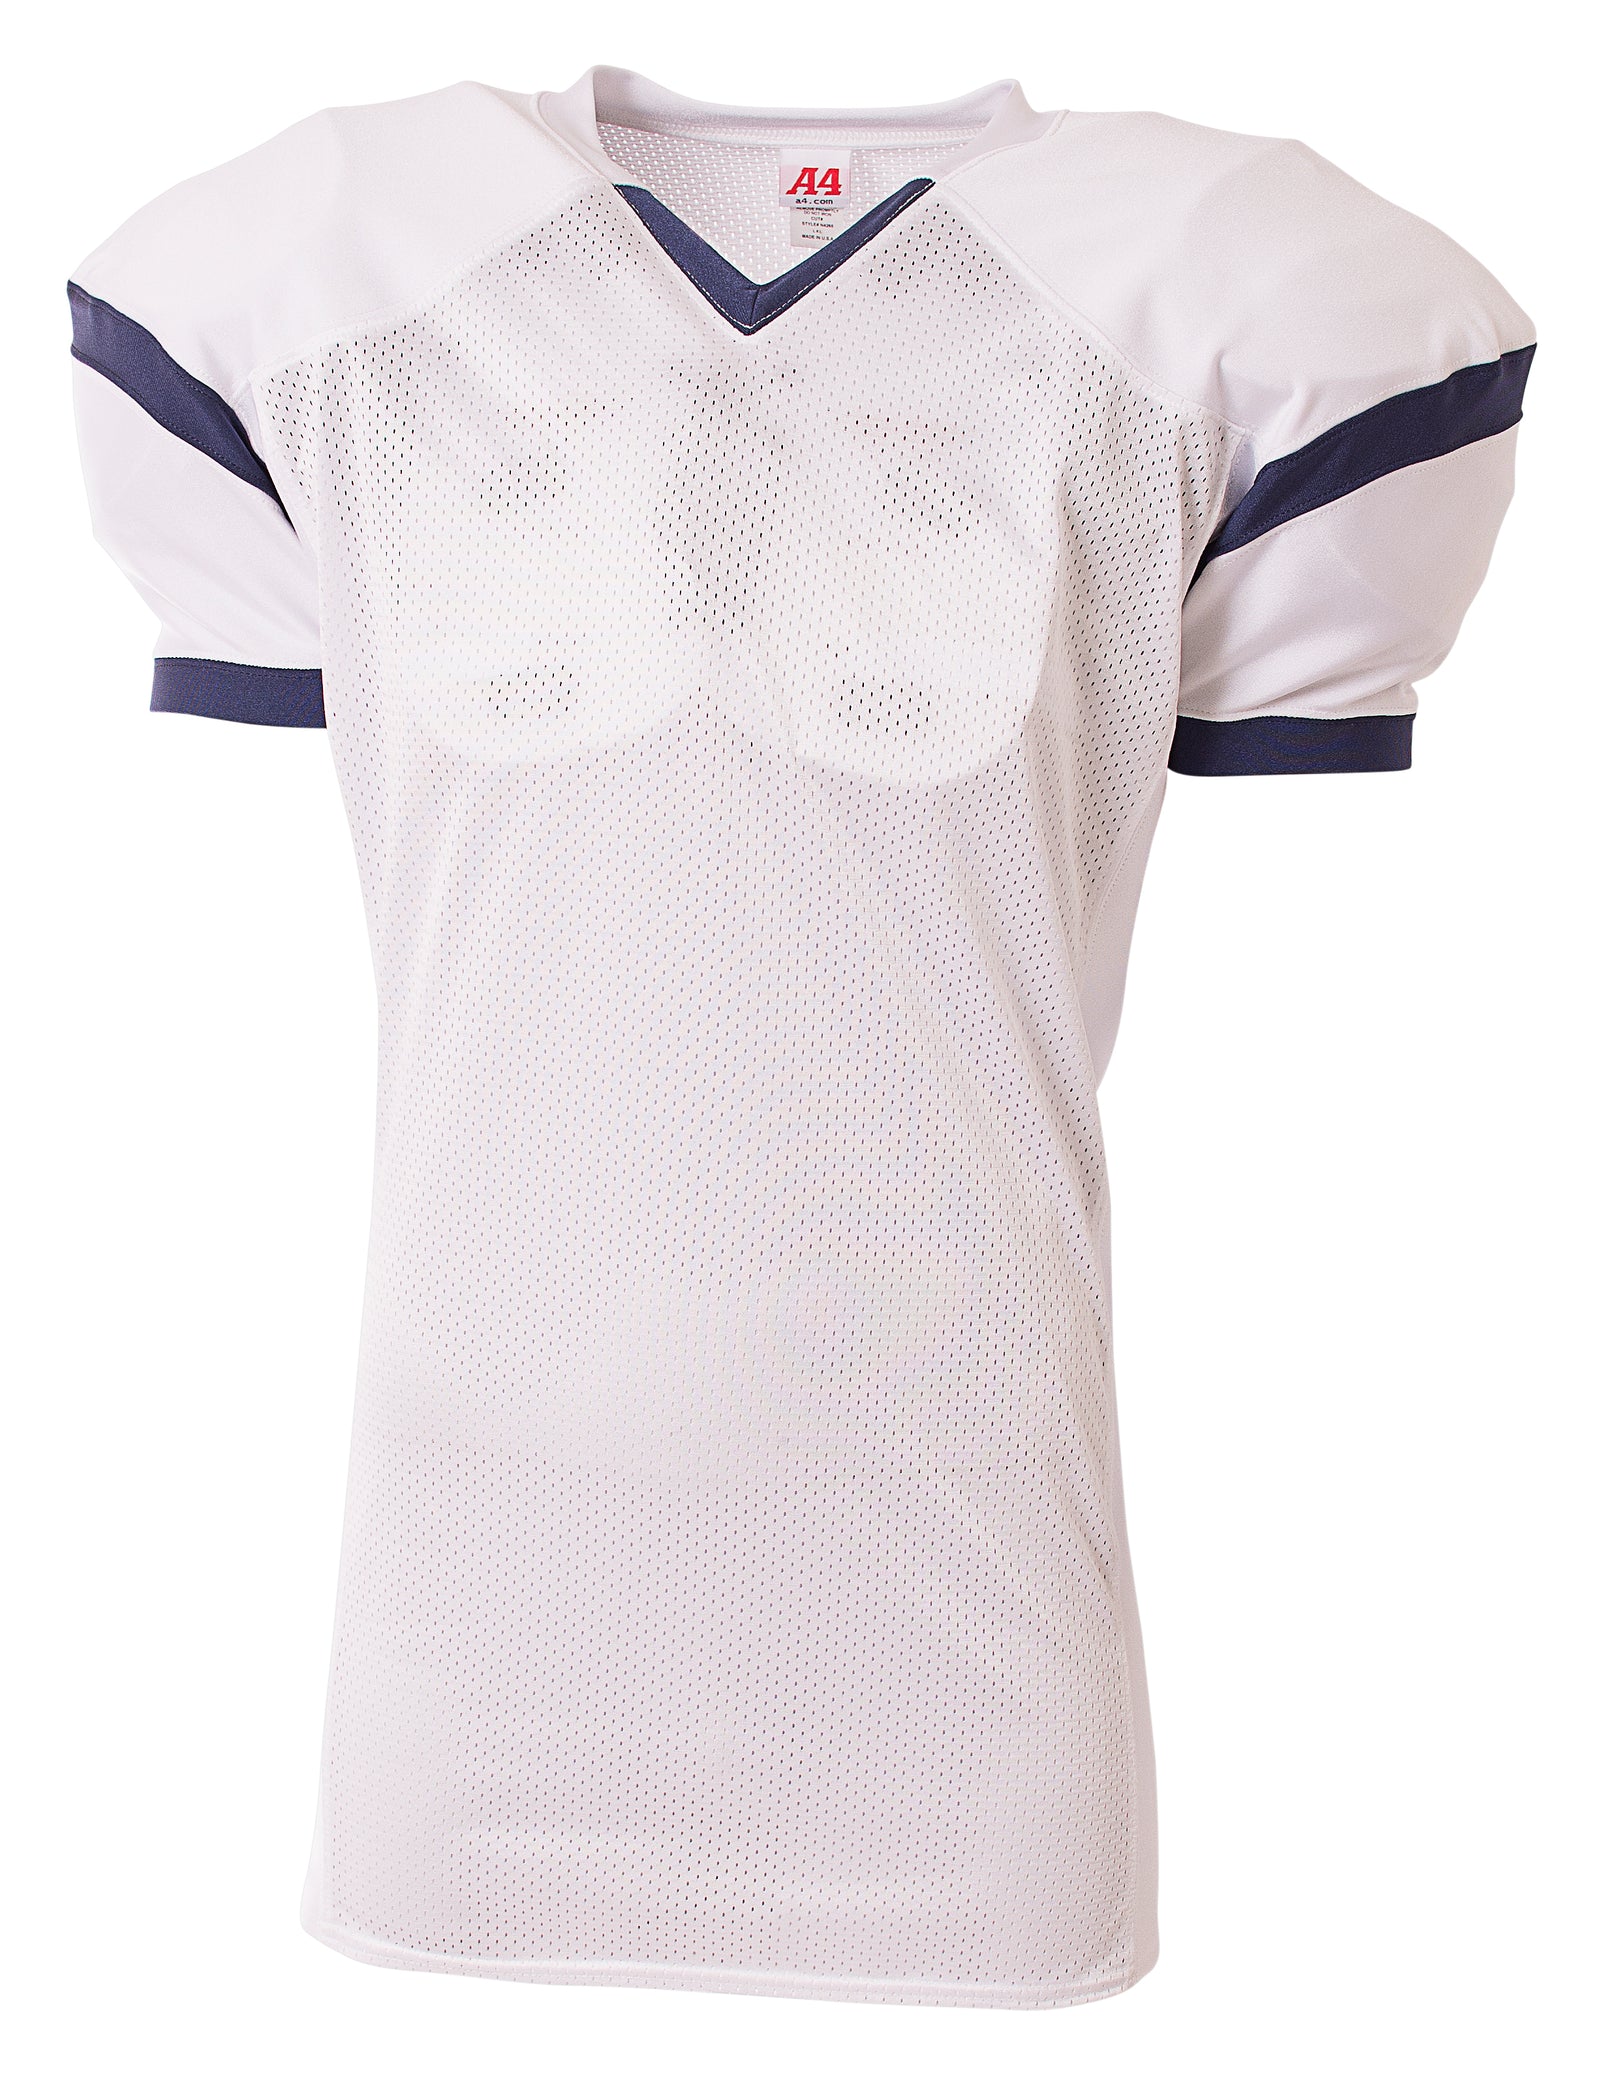 White/navy A4 A4 Rollout Football Jersey